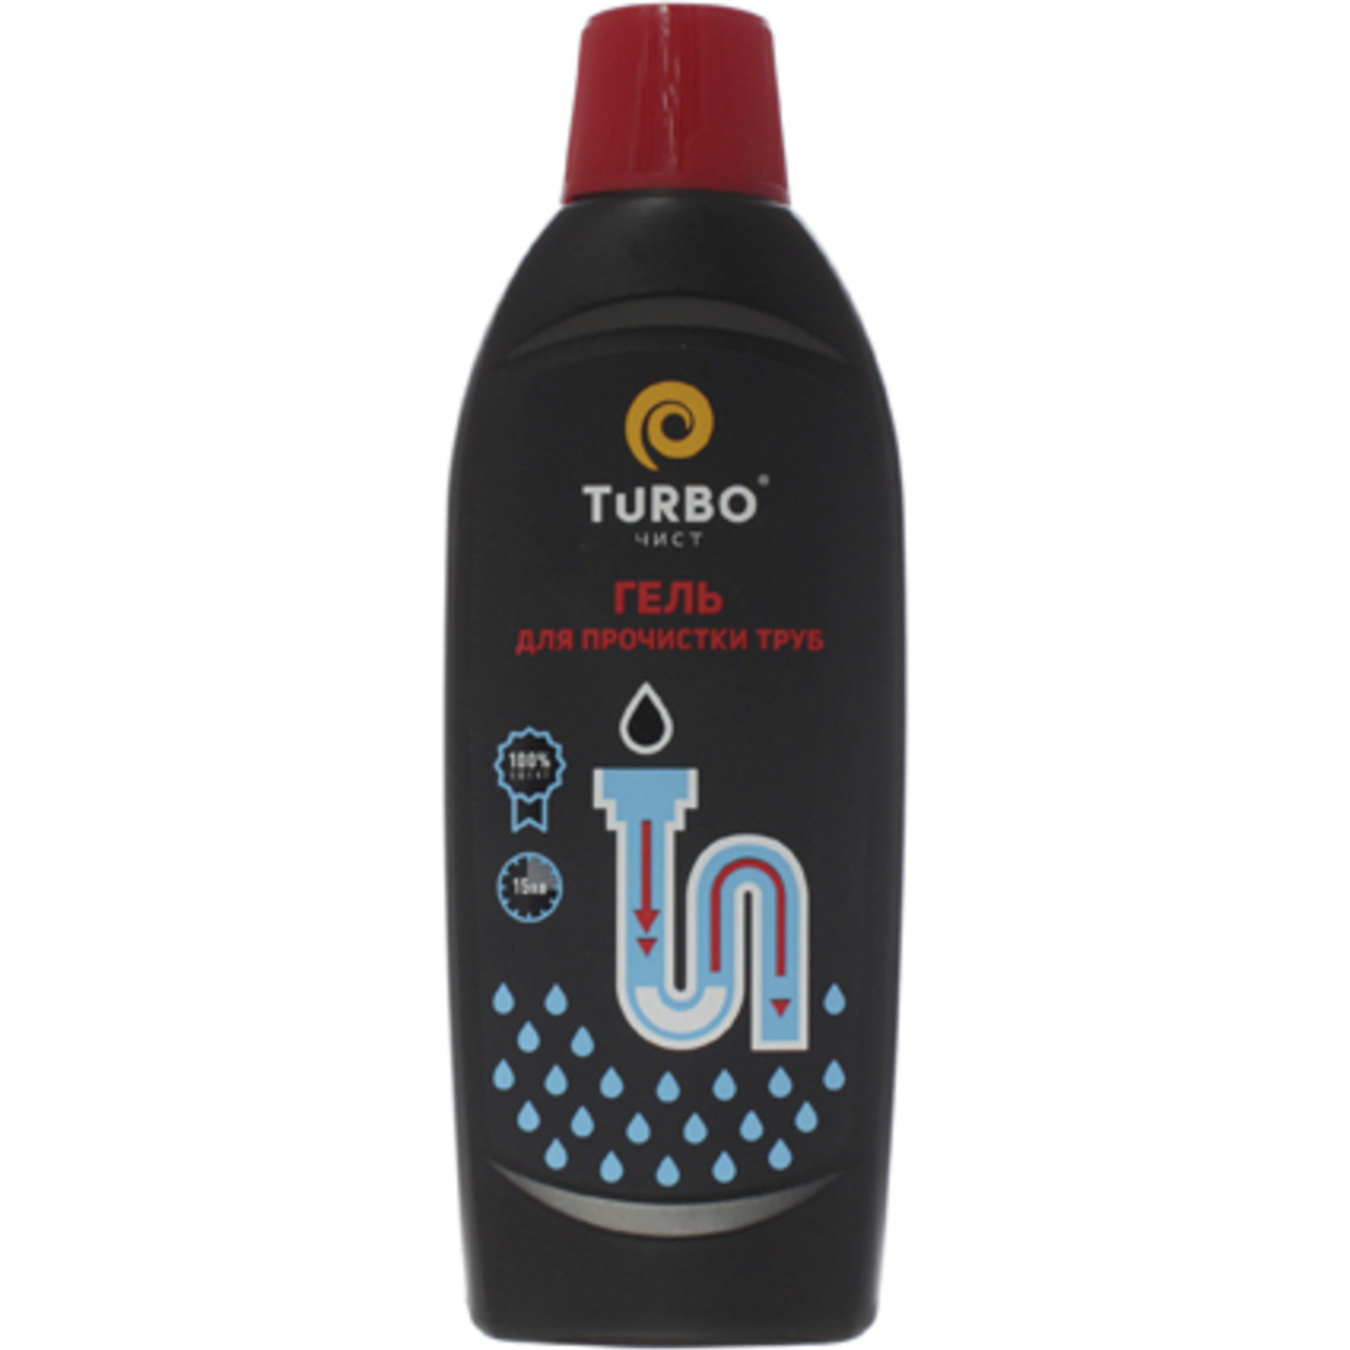 Turbochist Gel for Pipe Cleaning 500ml